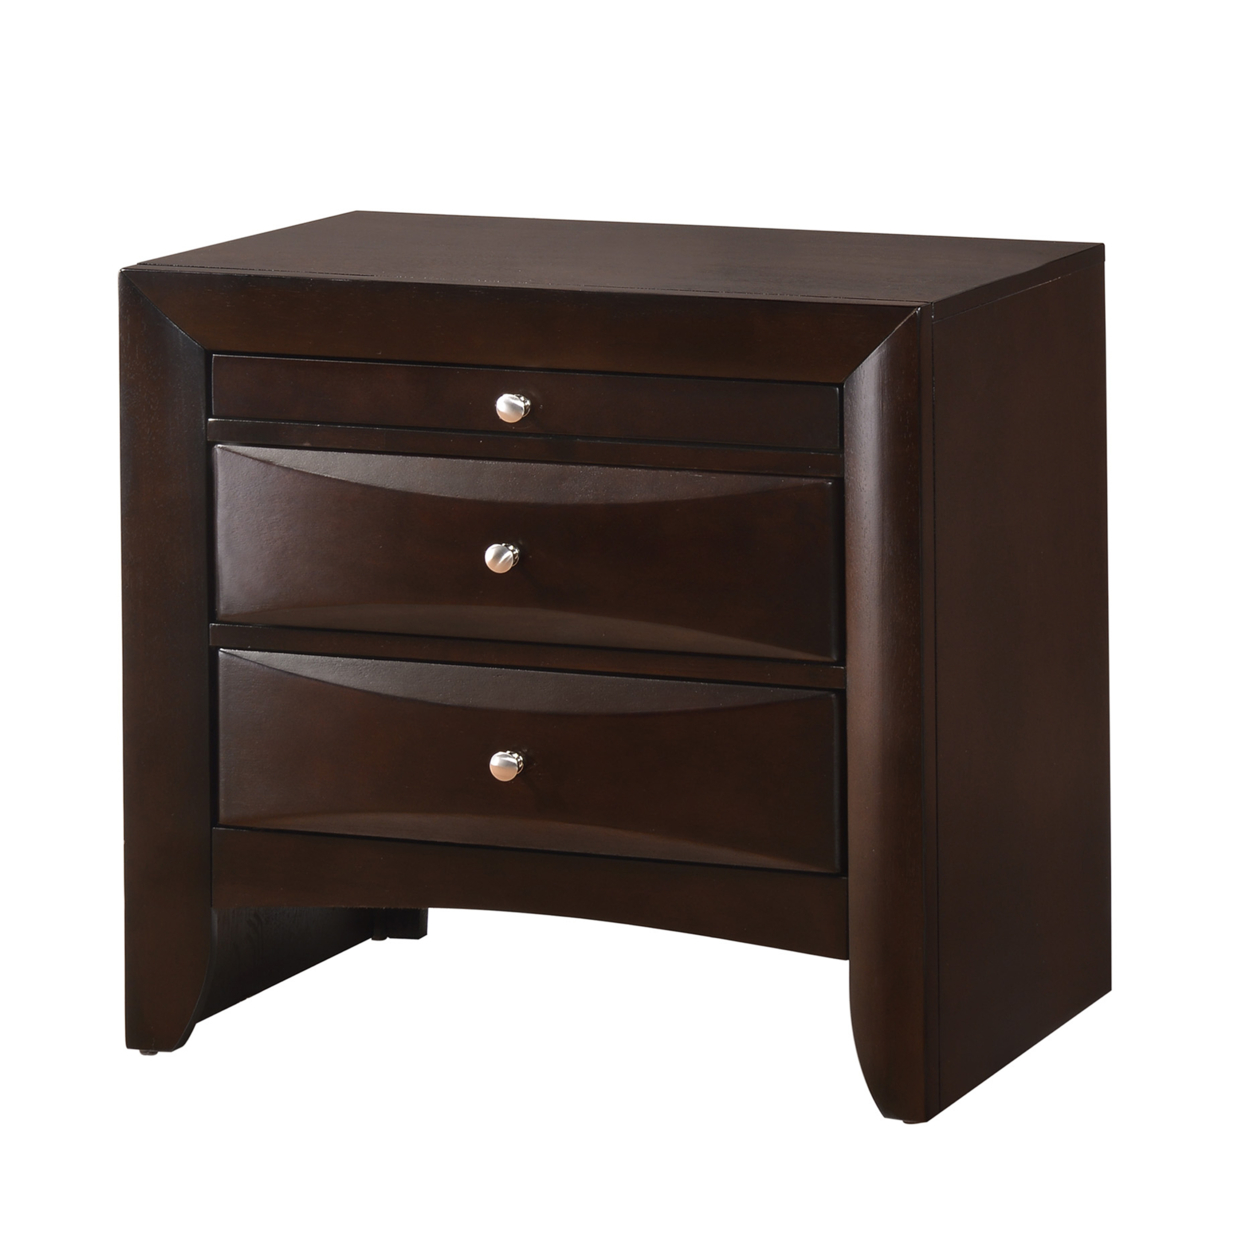 Wooden Nightstand With Two Drawers And Pull Out Tray, Walnut Brown- Saltoro Sherpi